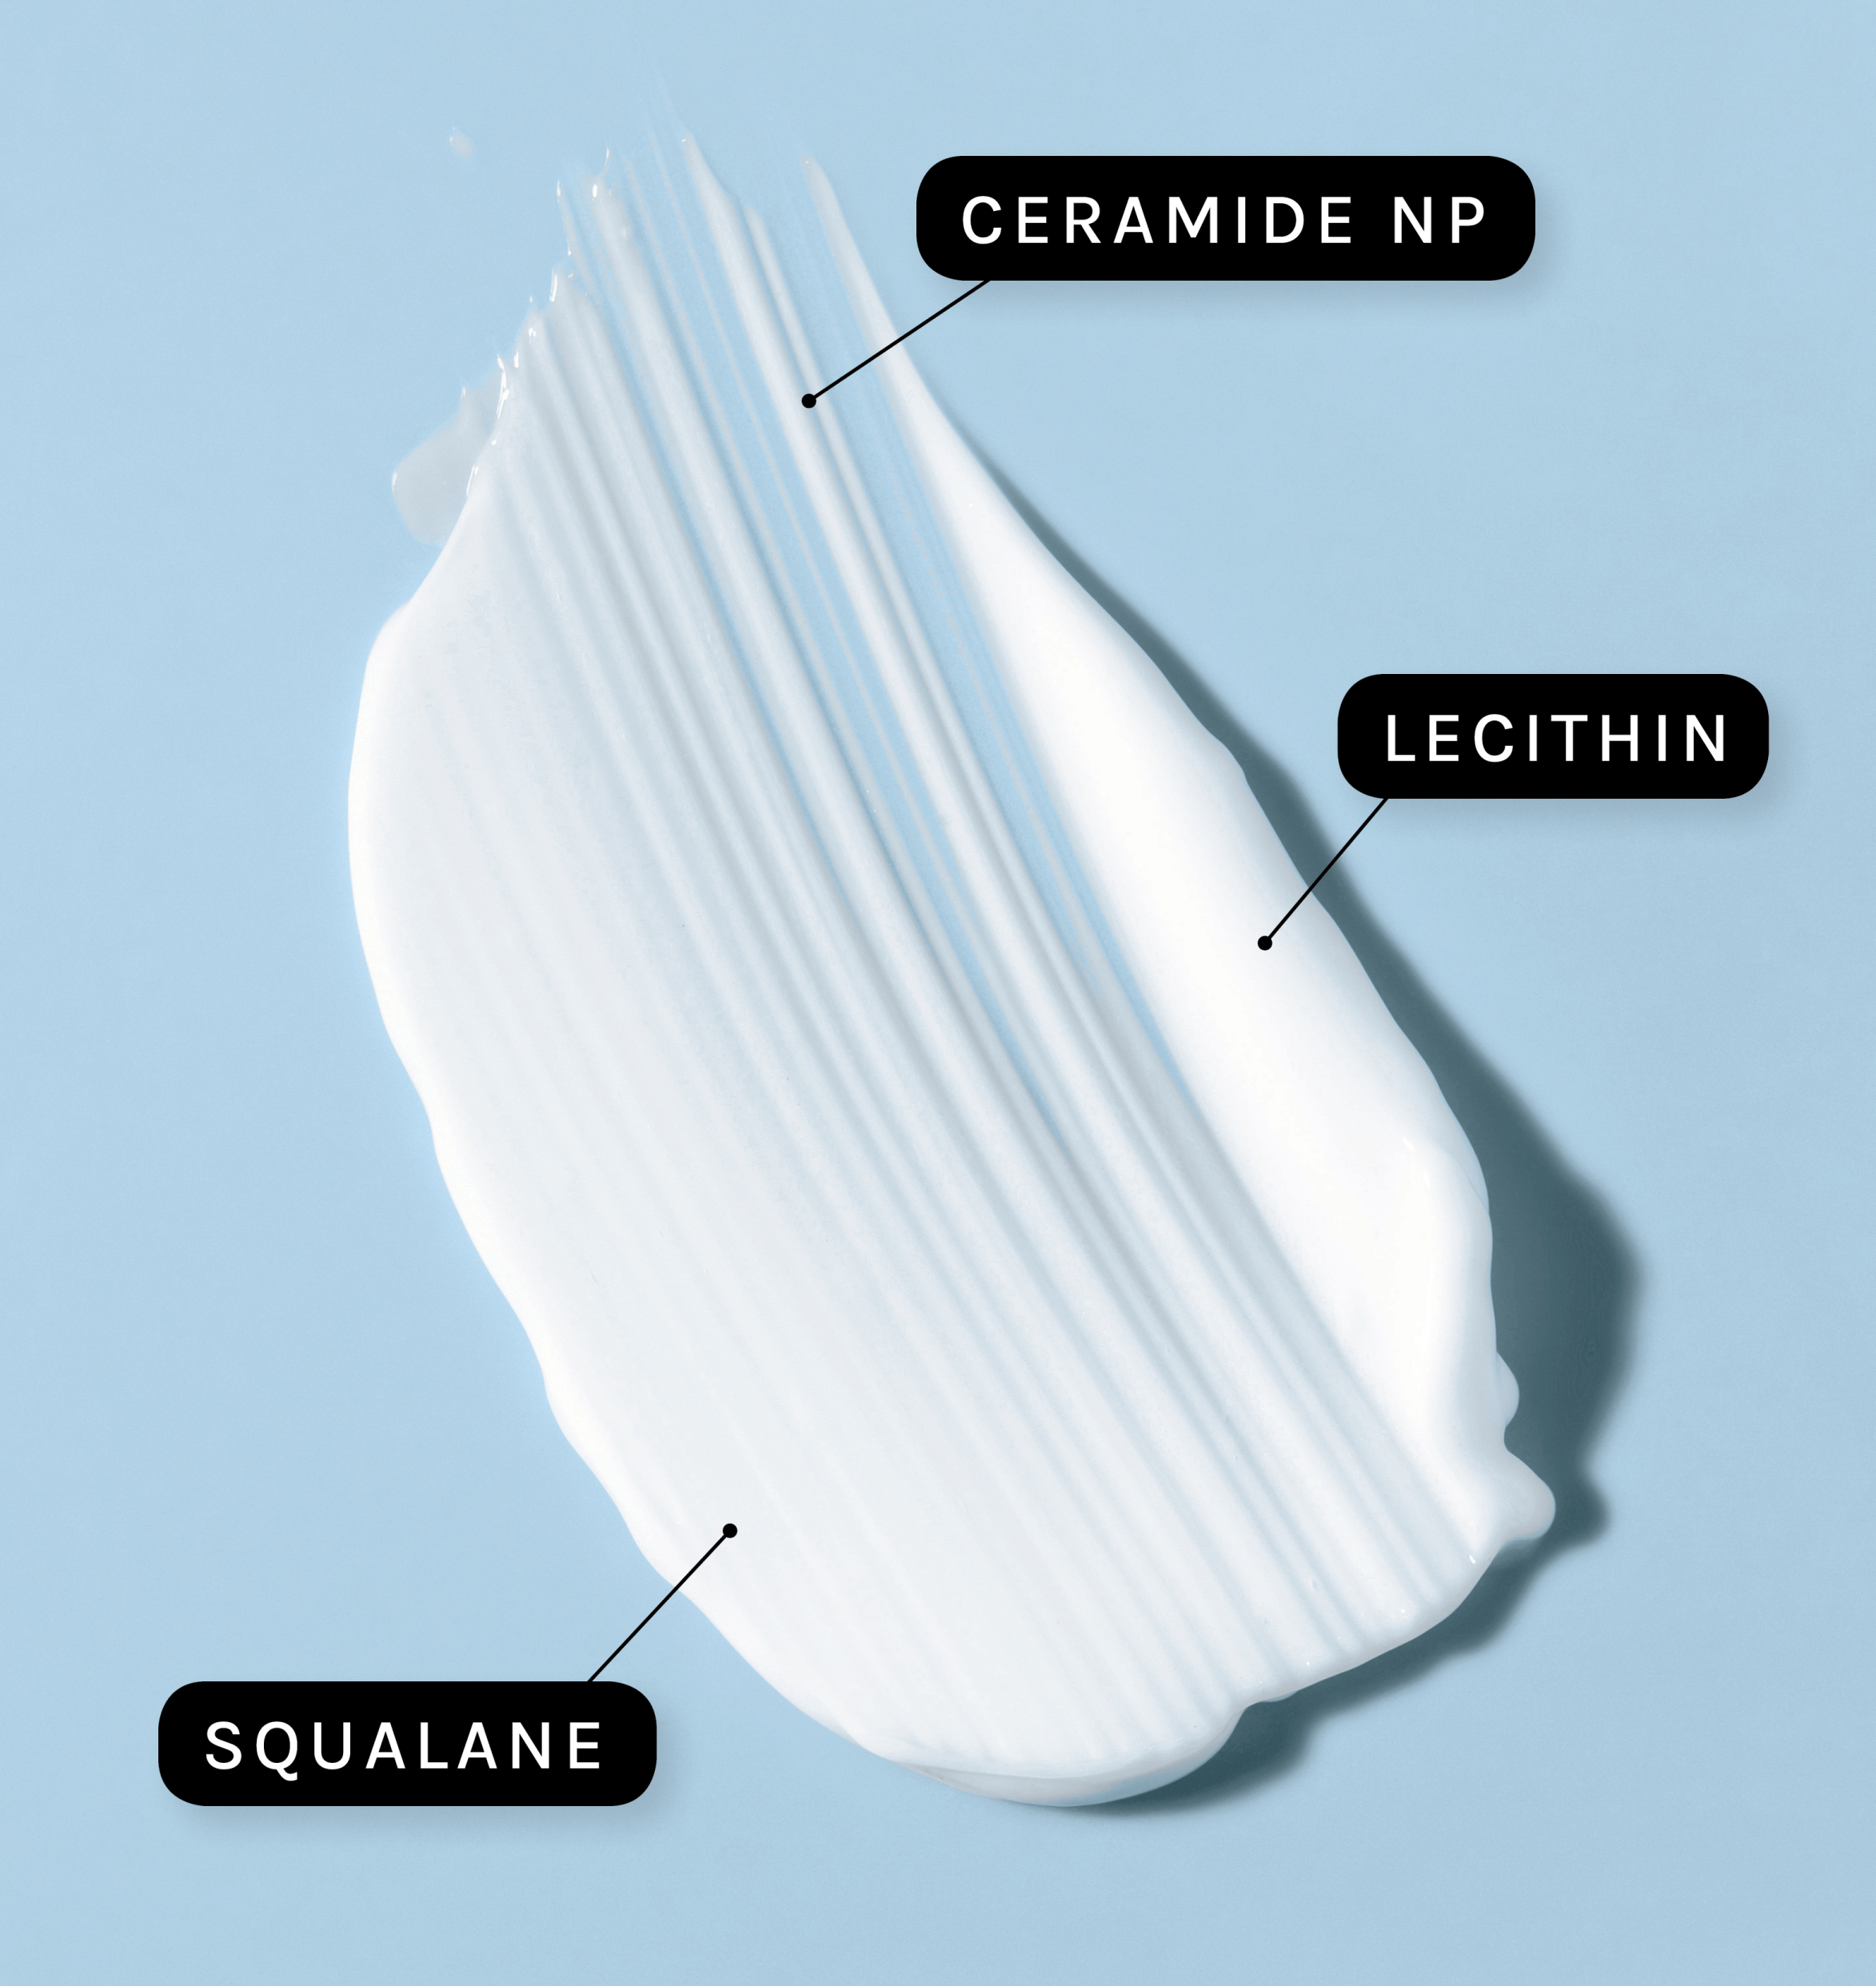 A spread of Physiogel cream on a light blue surface with three text bubbles: "Ceramide NP", "Lecithin", "Squalane"